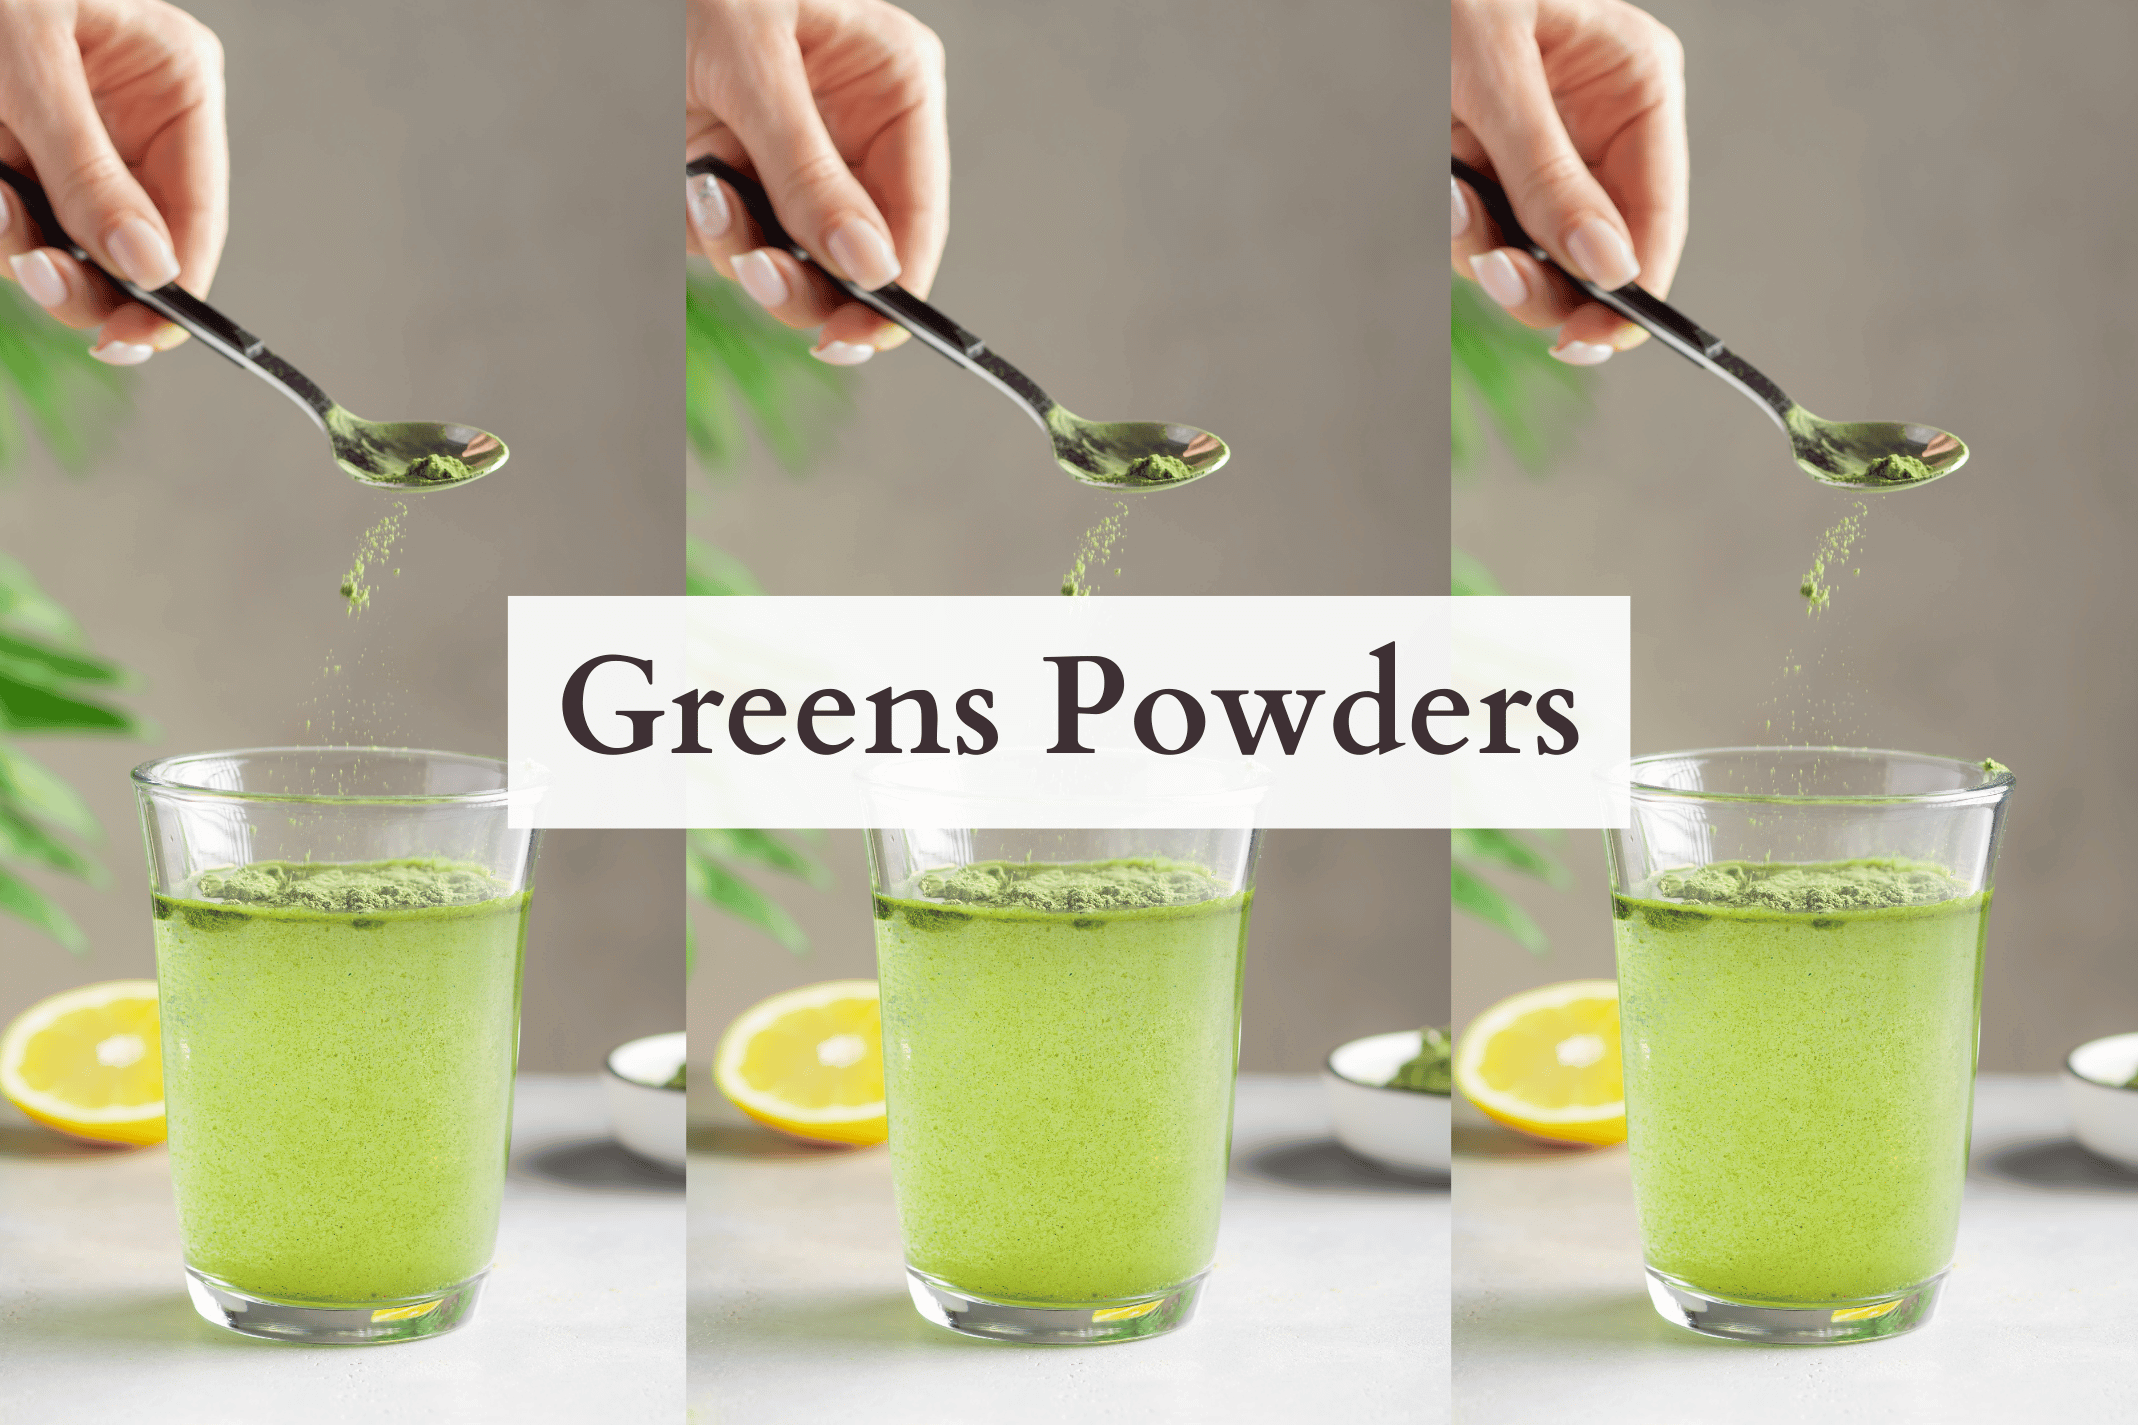 The best powdered greens